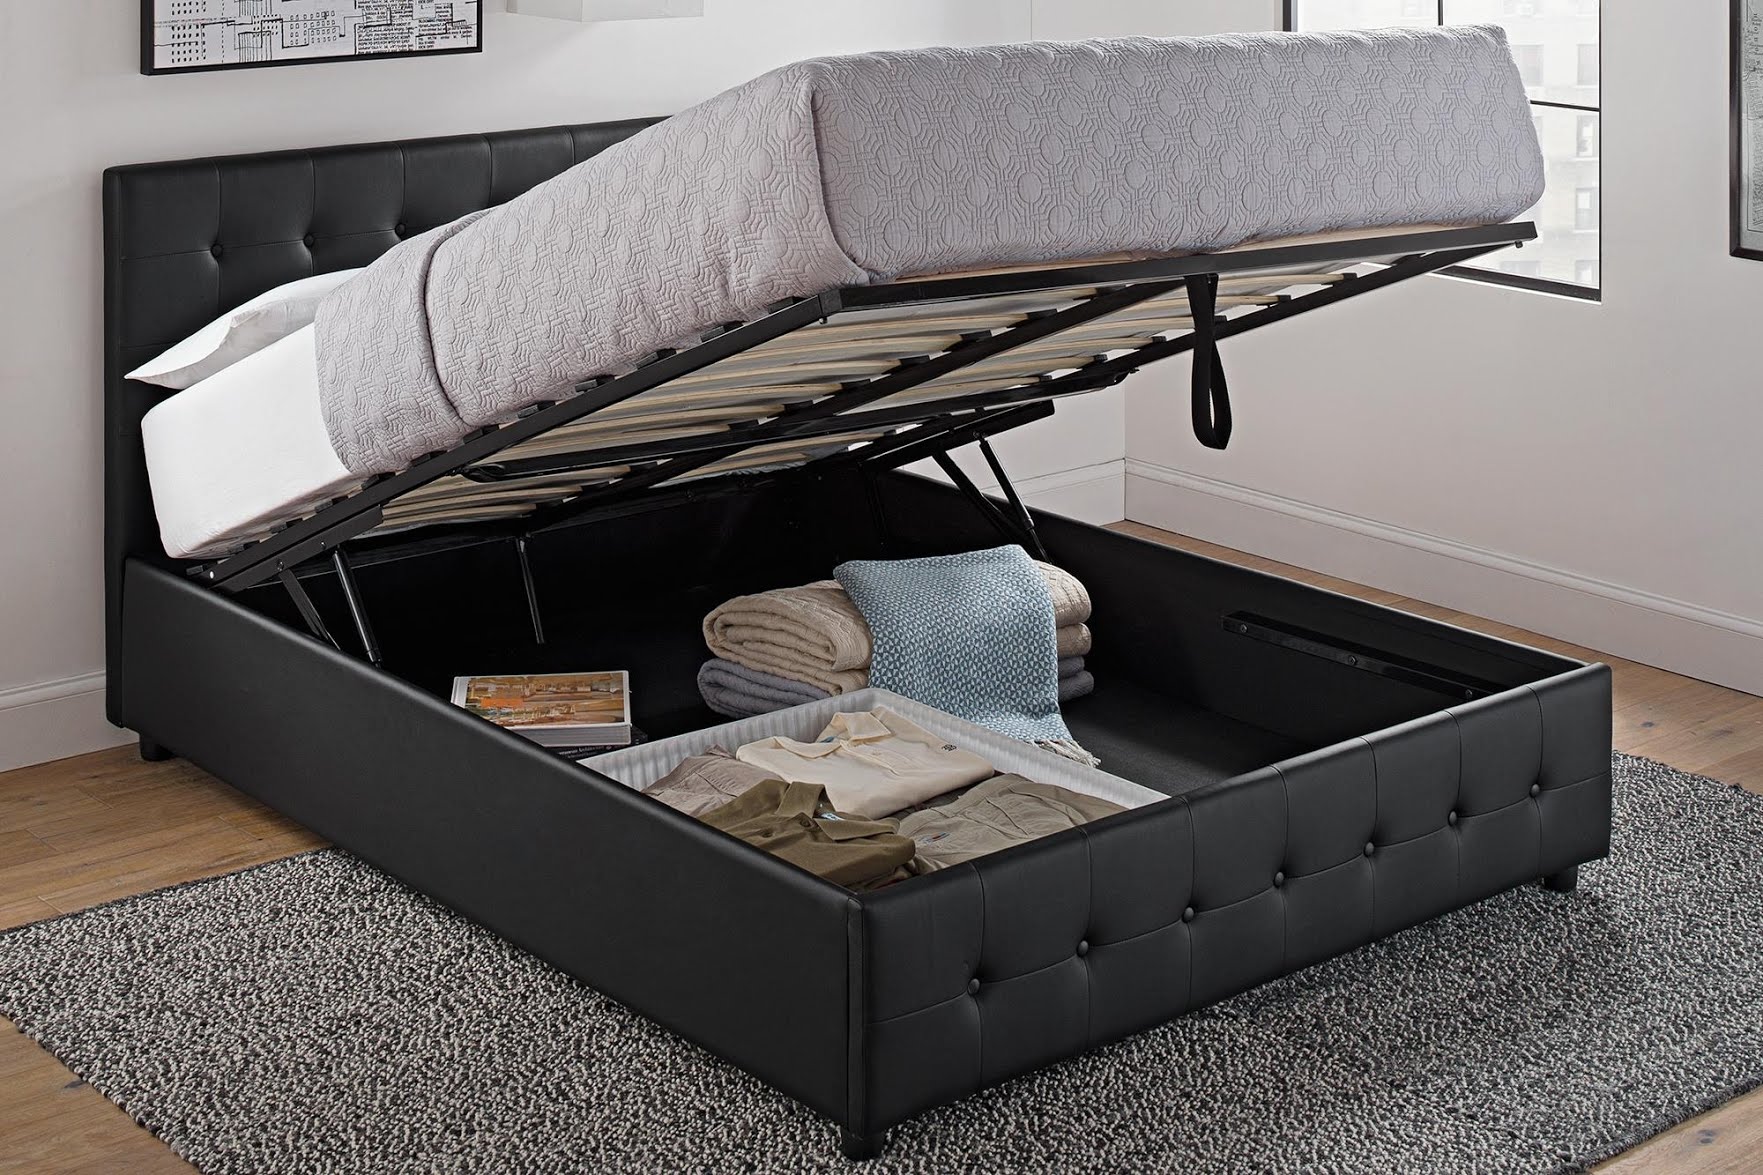 Lift Up Storage Bed Visualhunt, Bed Frame That Lifts For Storage